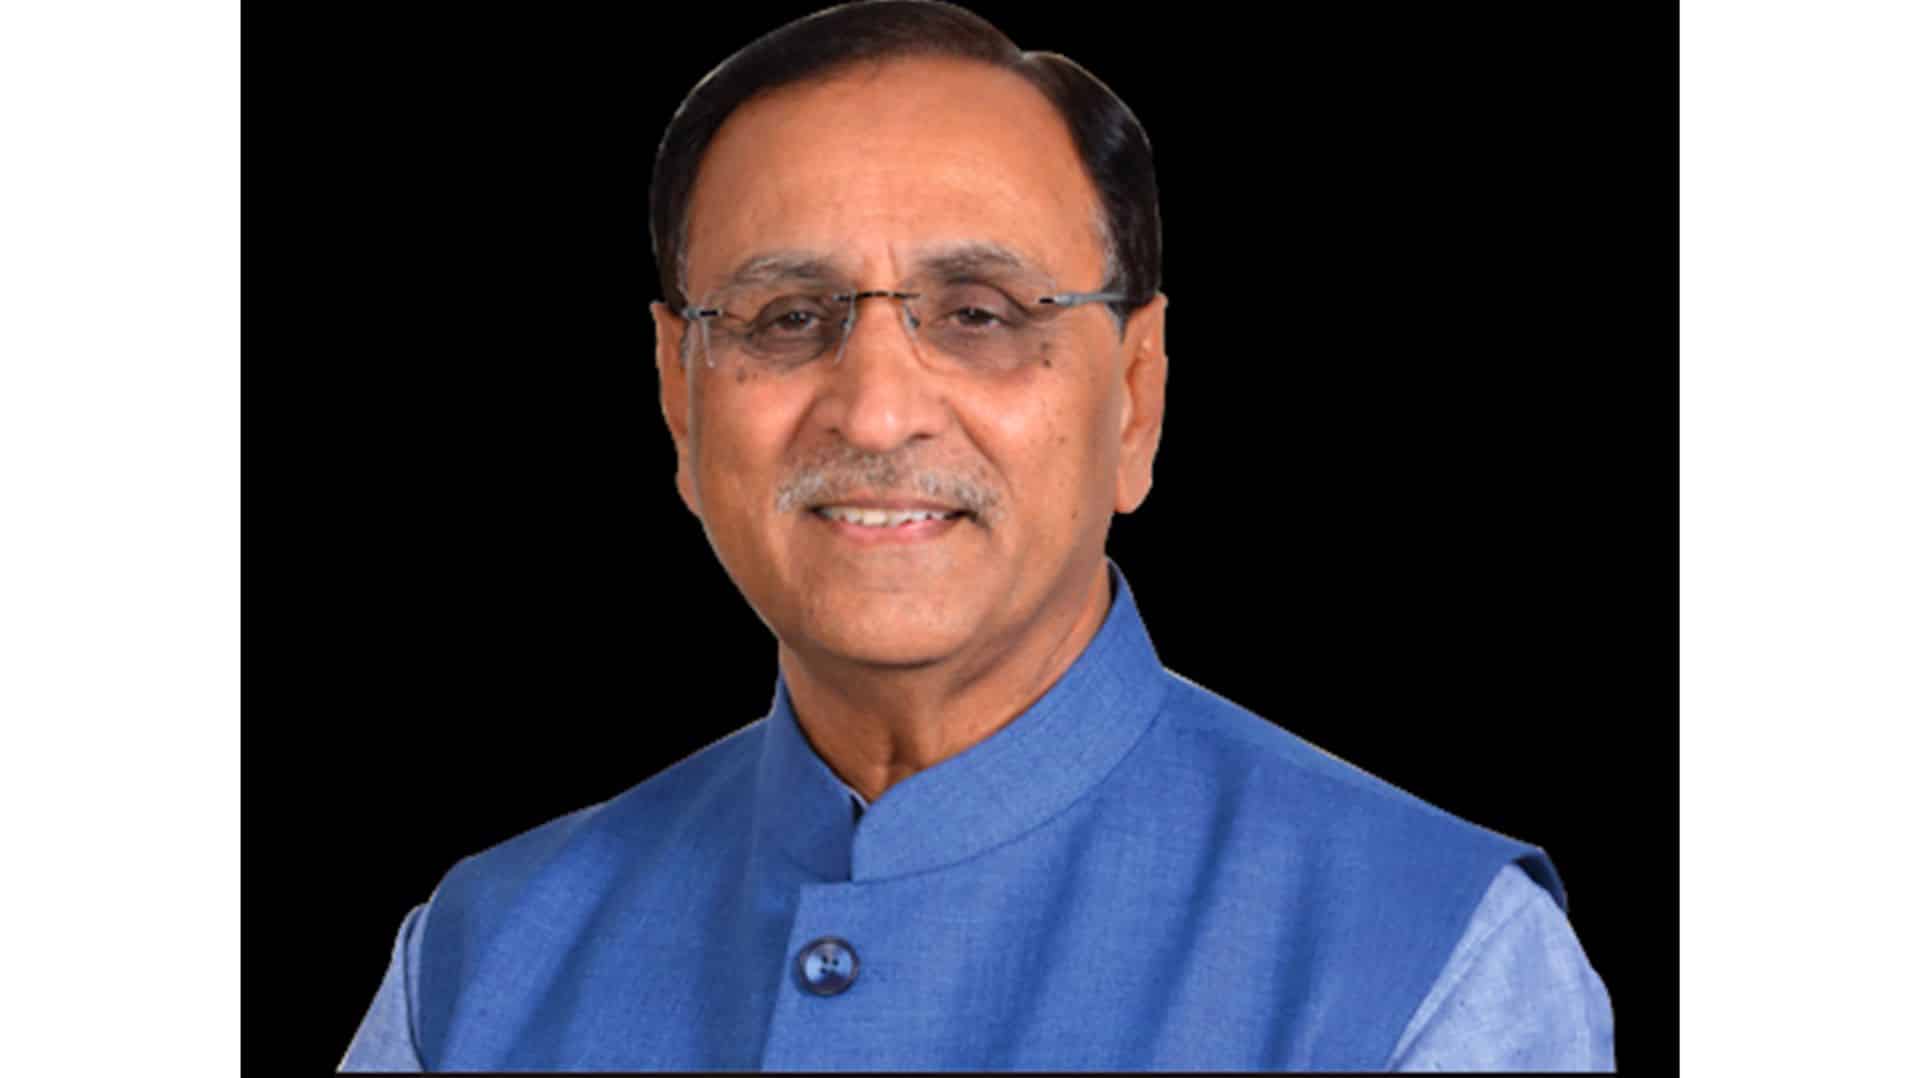 Vijay Rupani resigns as Gujarat CM, to serve any role 'assigned by party'